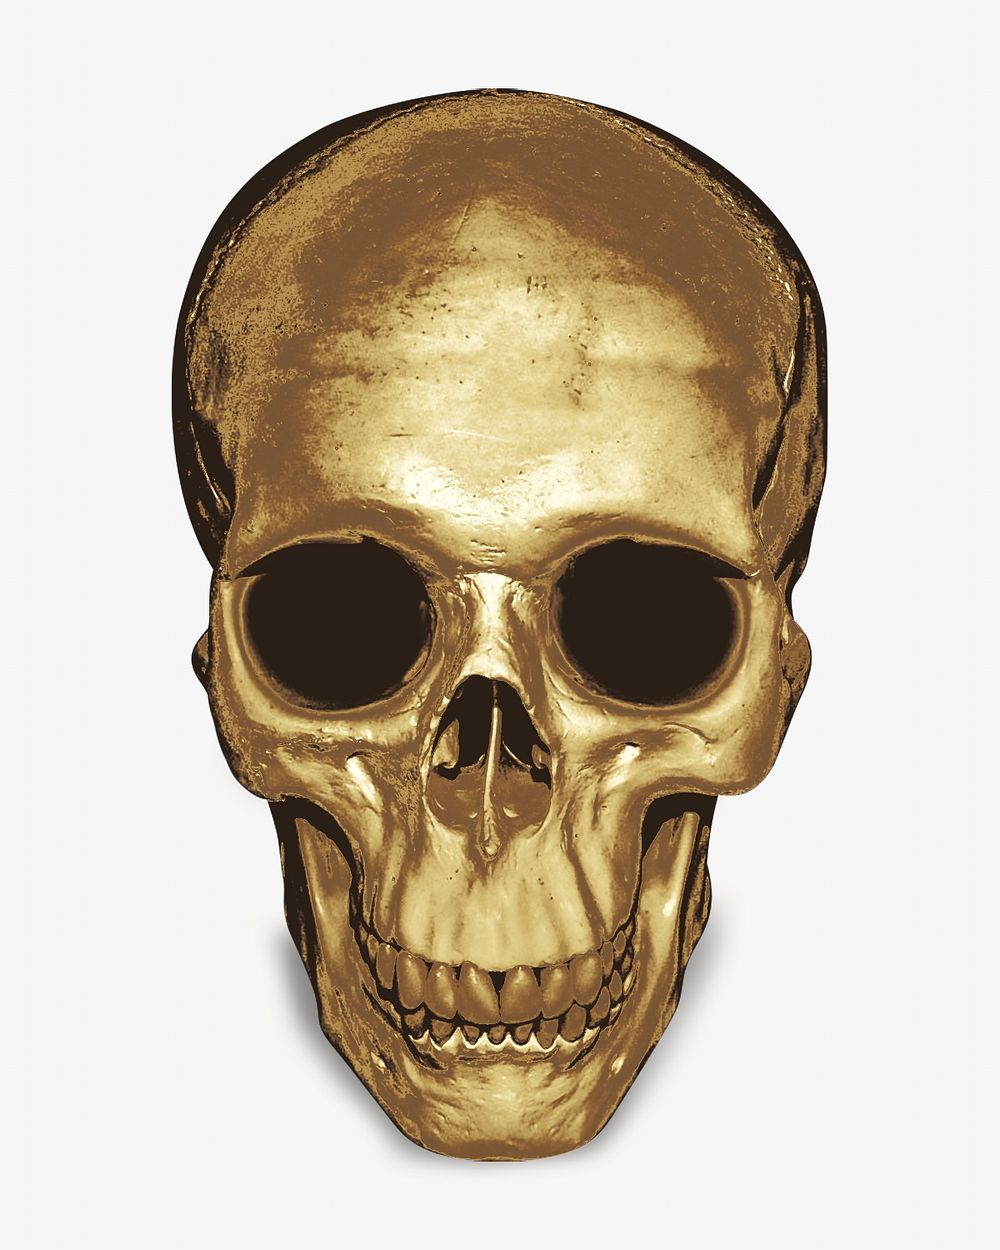 Gold skull collage element, isolated image